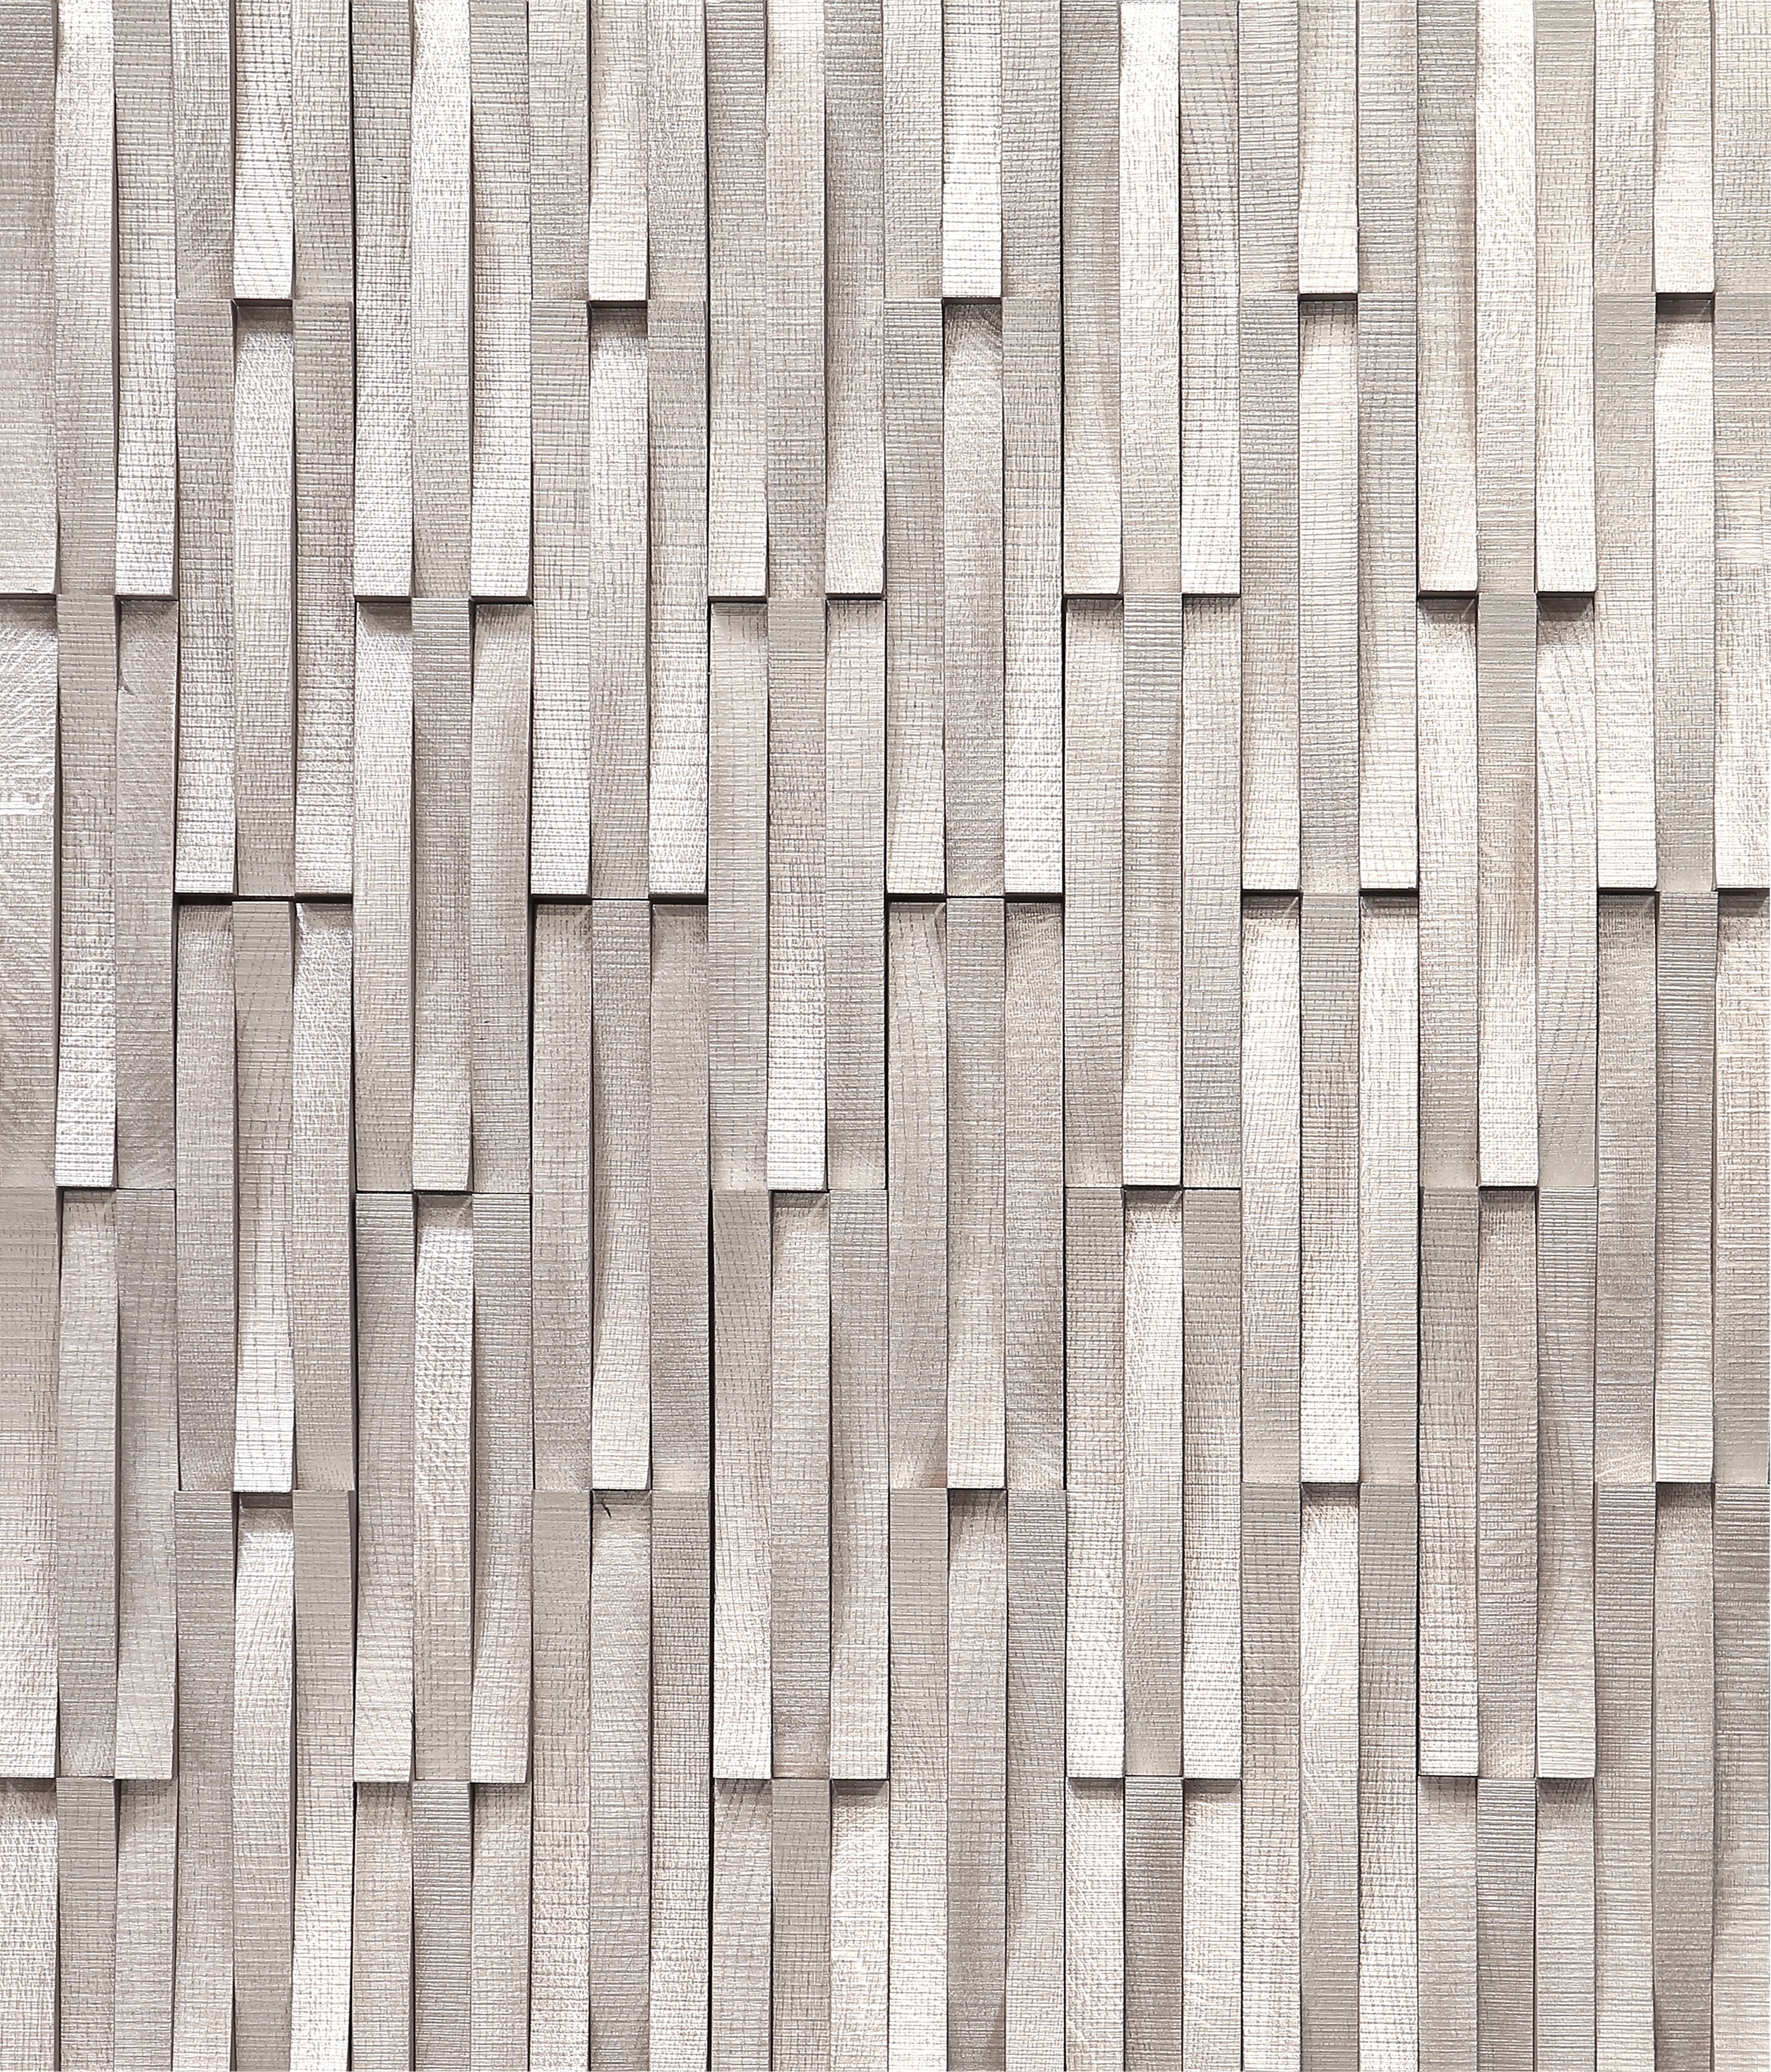 duchateau inceptiv krescent silver oak three dimensional wall natural wood panel lacquer for interior use distributed by surface group international